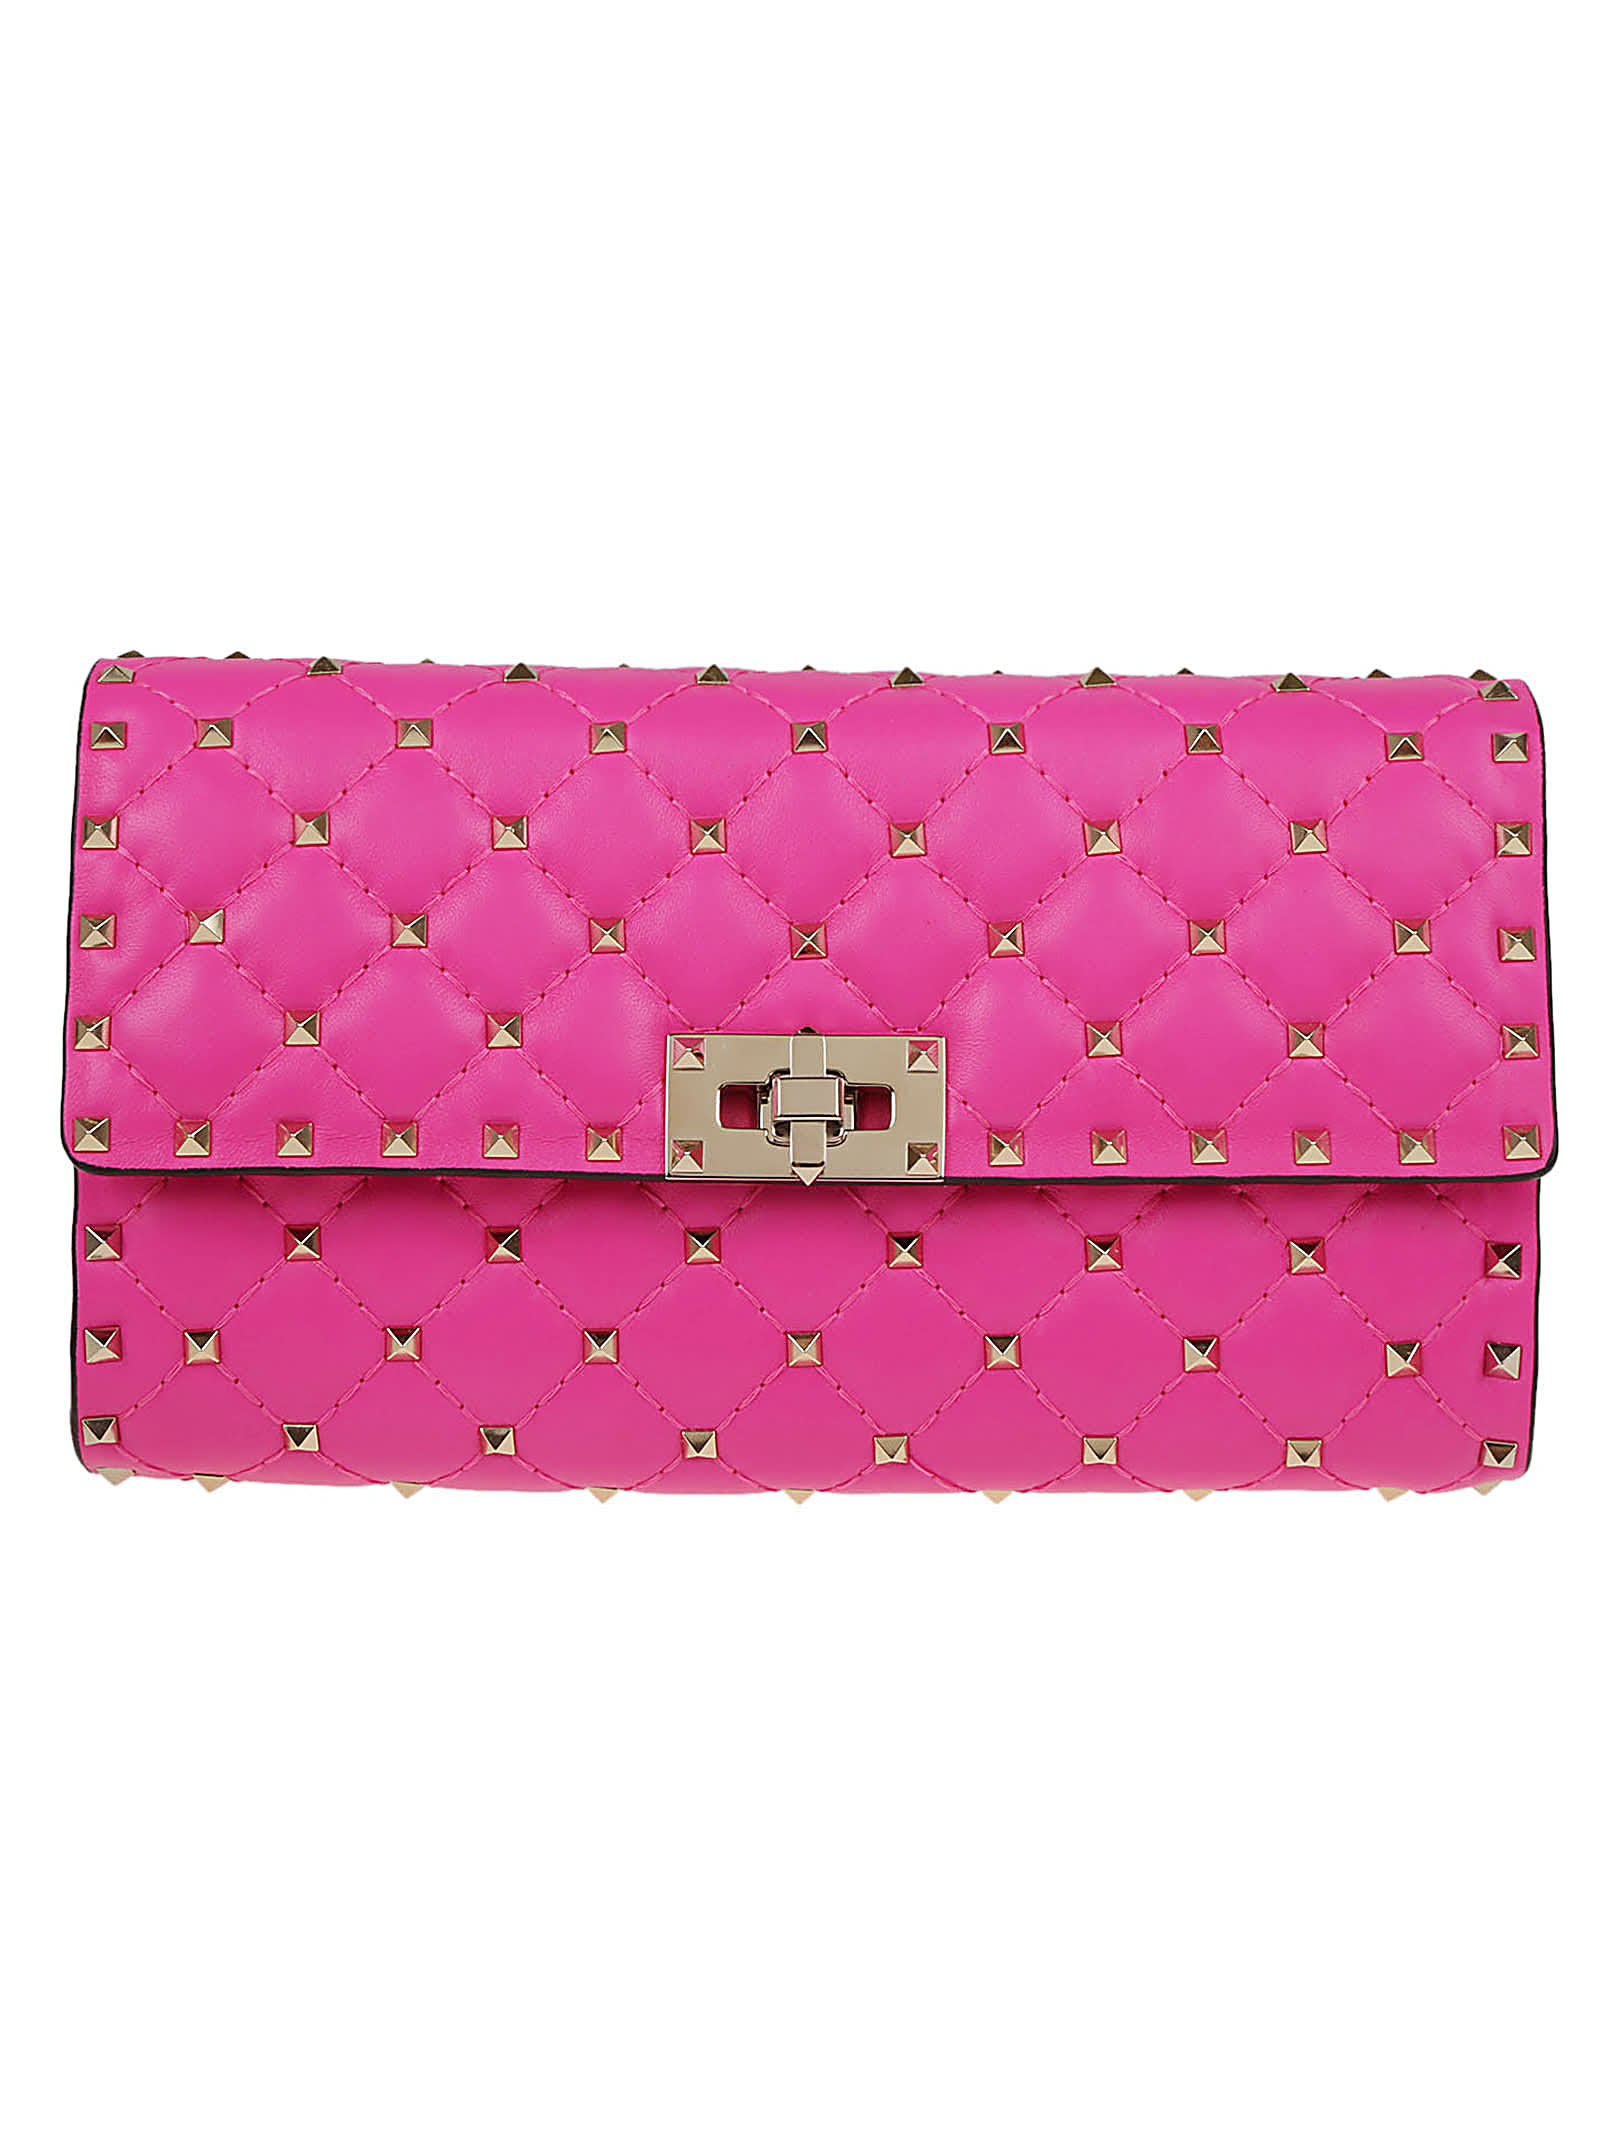 Rockstud Spike Nappa Leather Crossbody Clutch Bag for Woman in Pink Pp